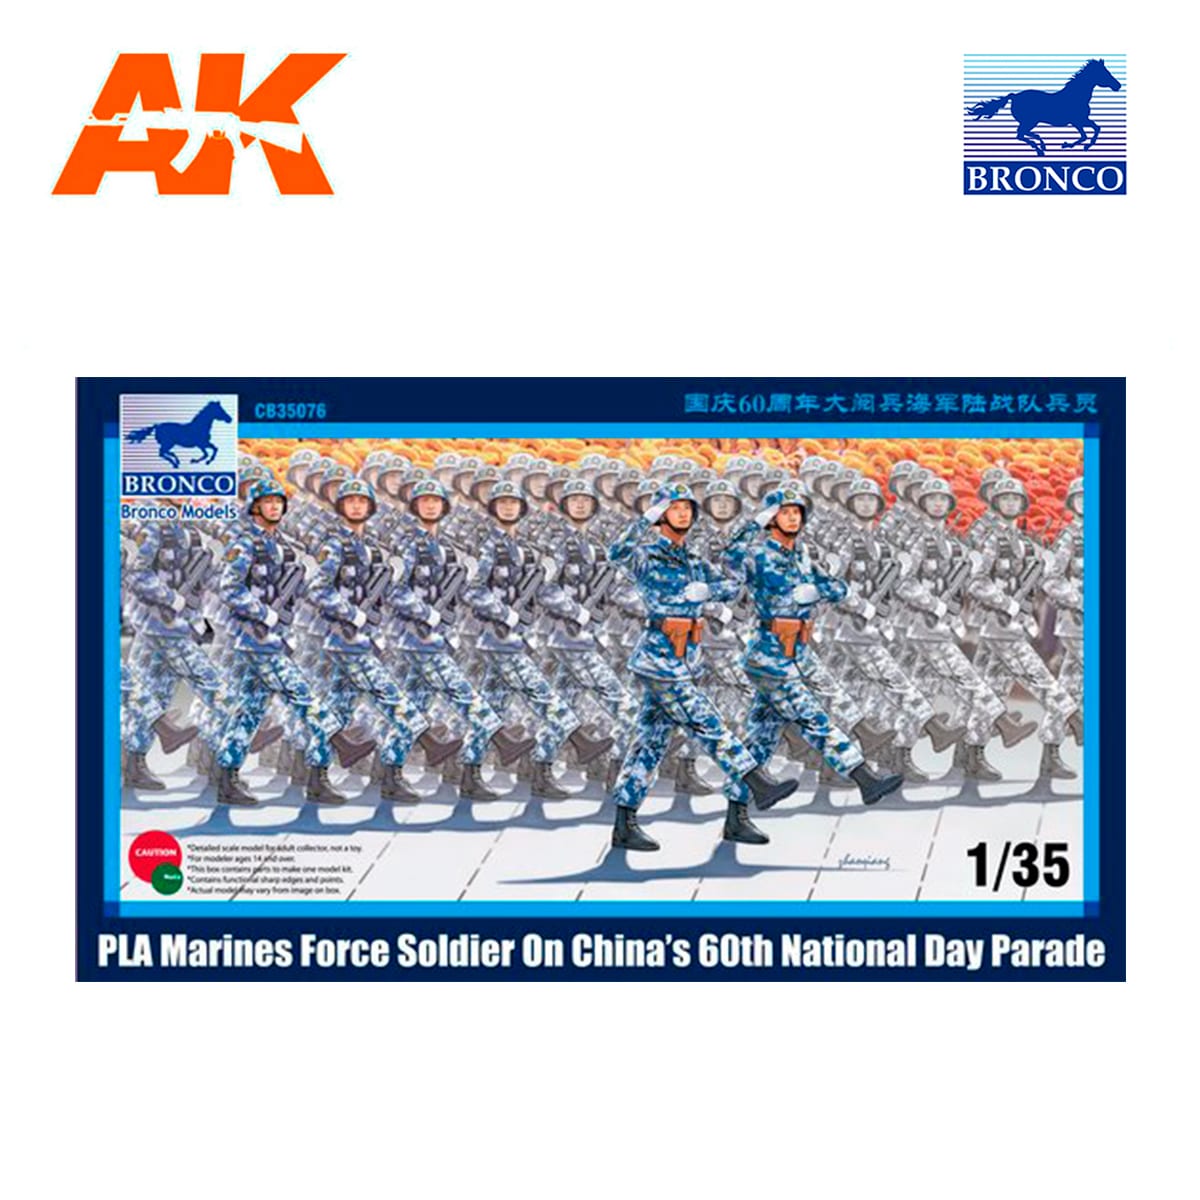 1/35 PLA Marines Force Soldier on China’s 60th National Day Parade